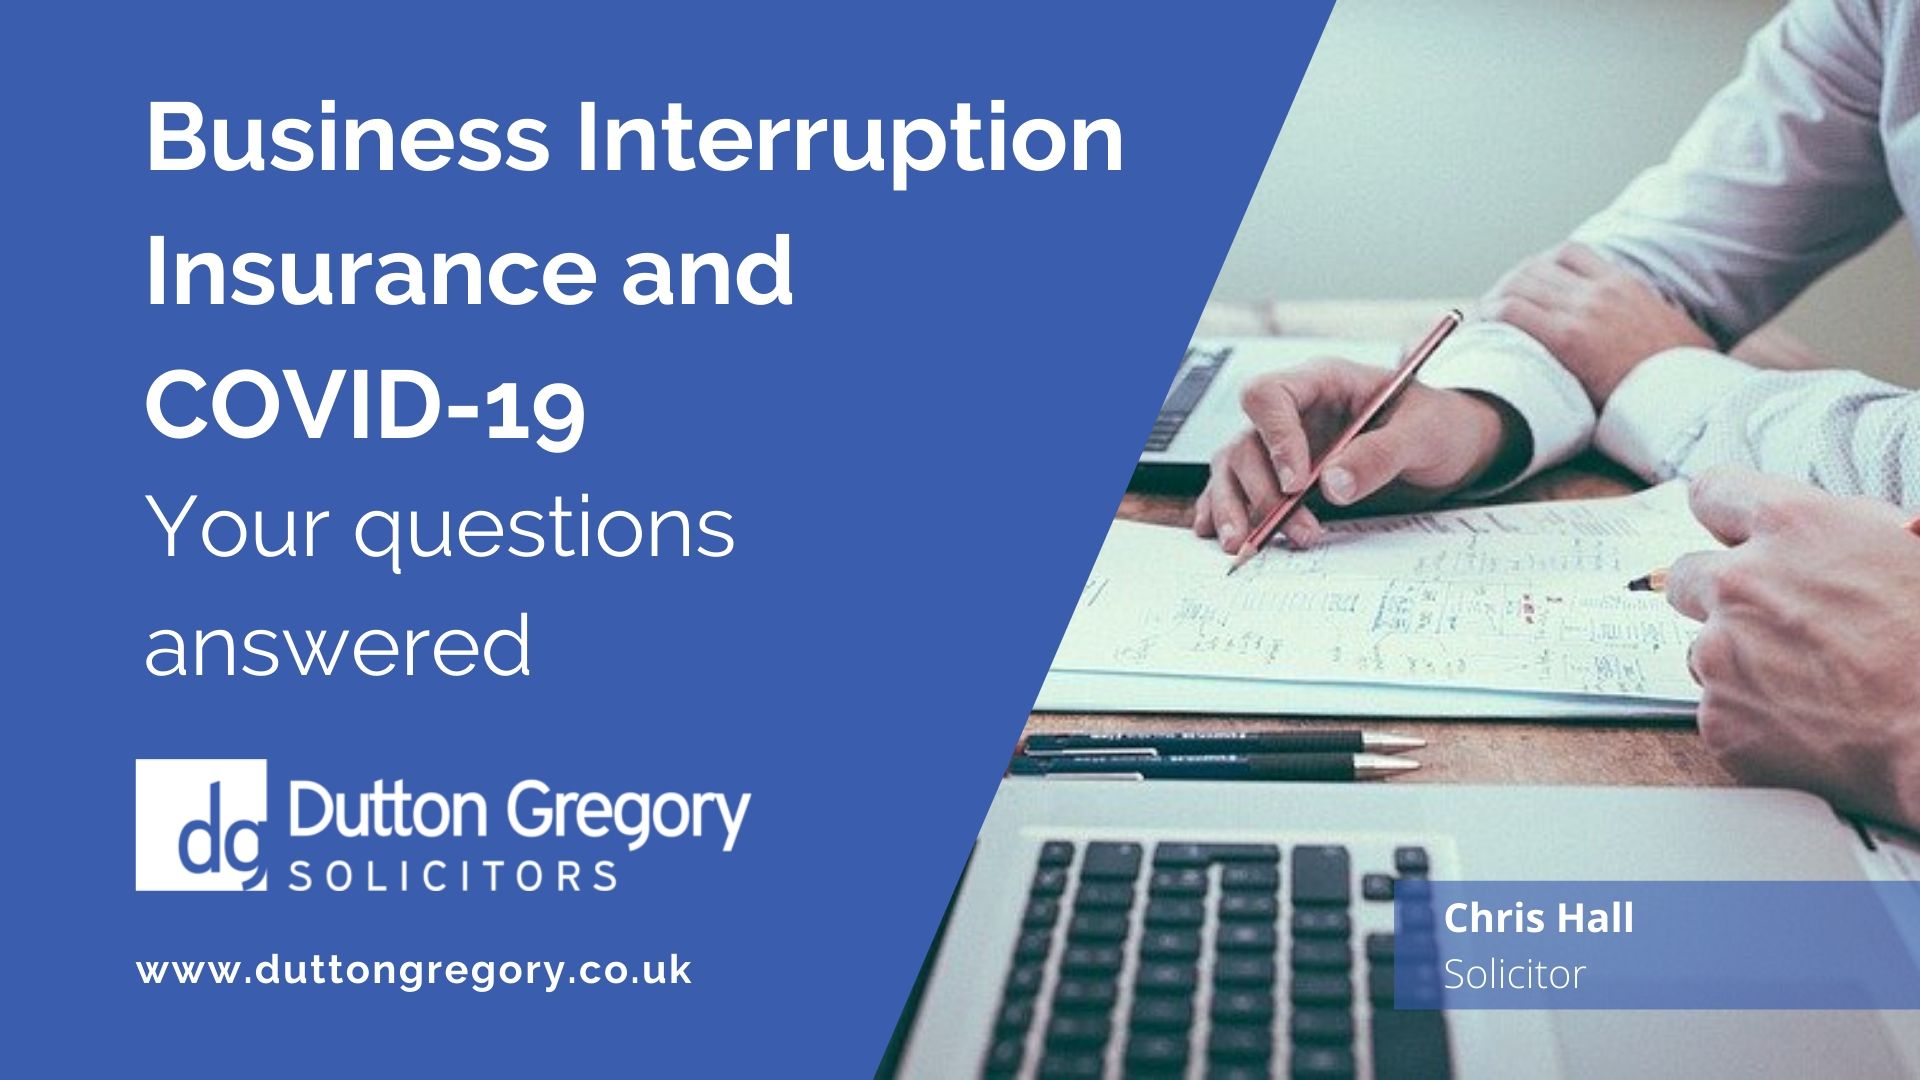 Business Interruption Insurance and COVID-19: Your Questions Answered